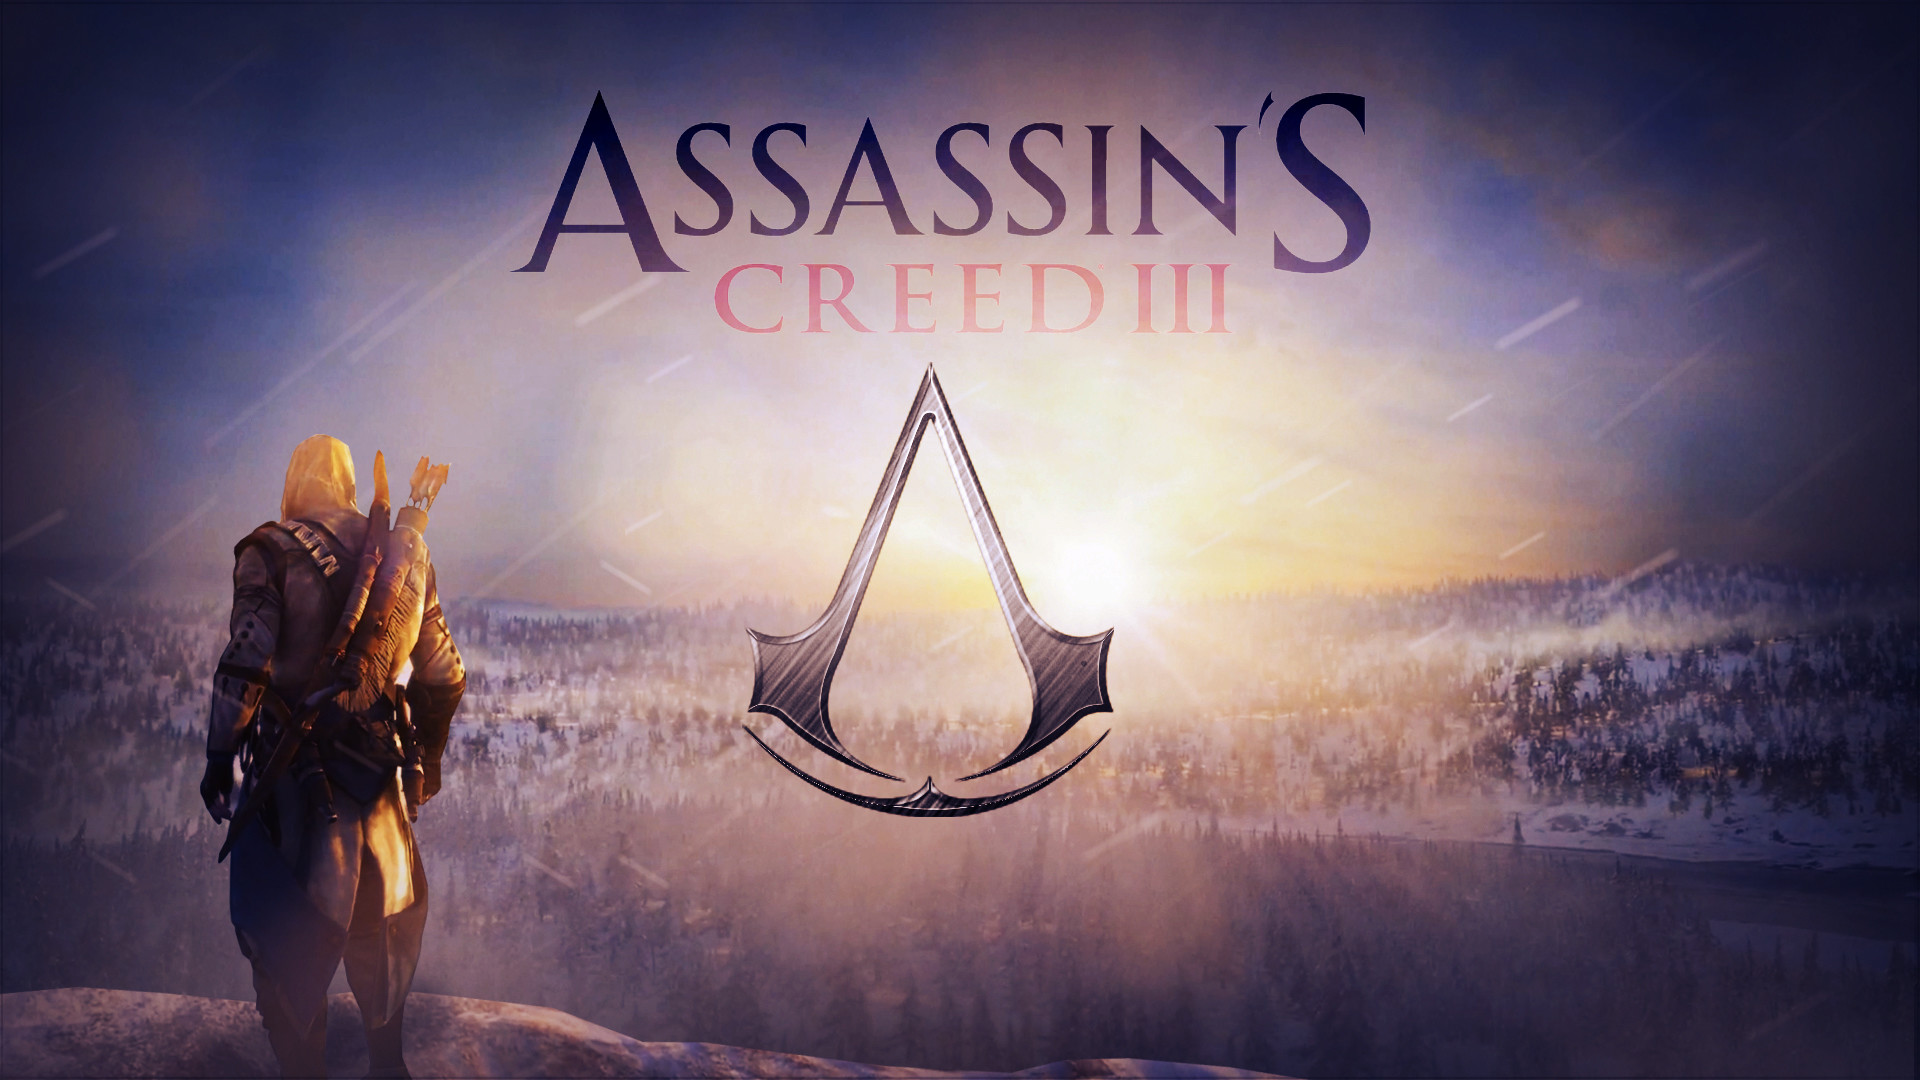 1920x1080 ... Assassin's Creed III Wallpaper HD by Samuels-Graphics